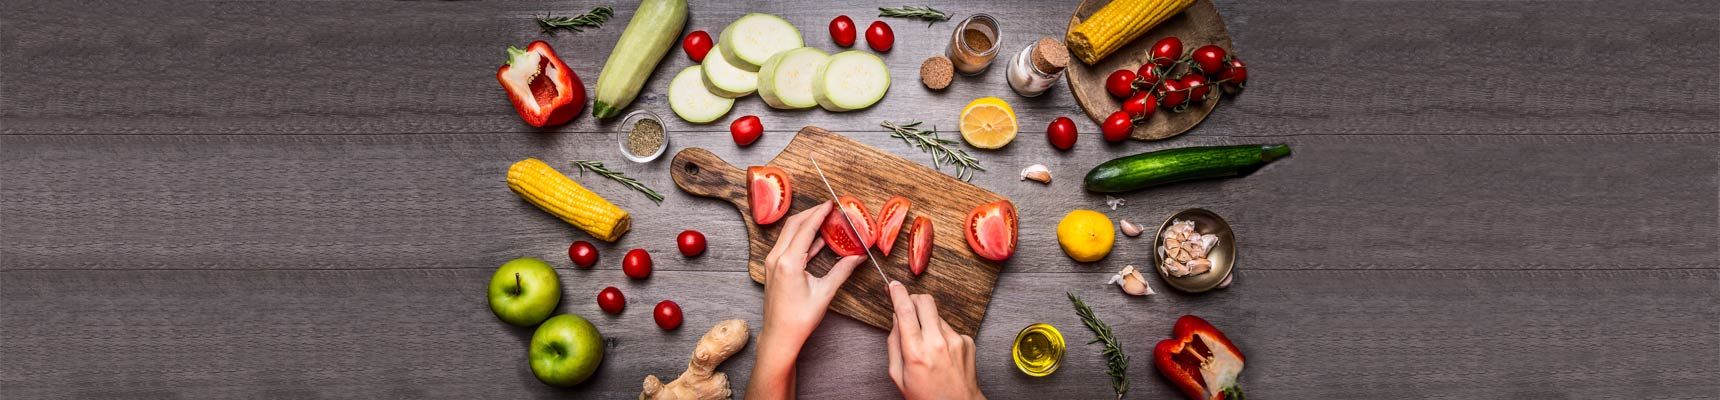 image of hands cutting up fruit and vegetables on cutting board